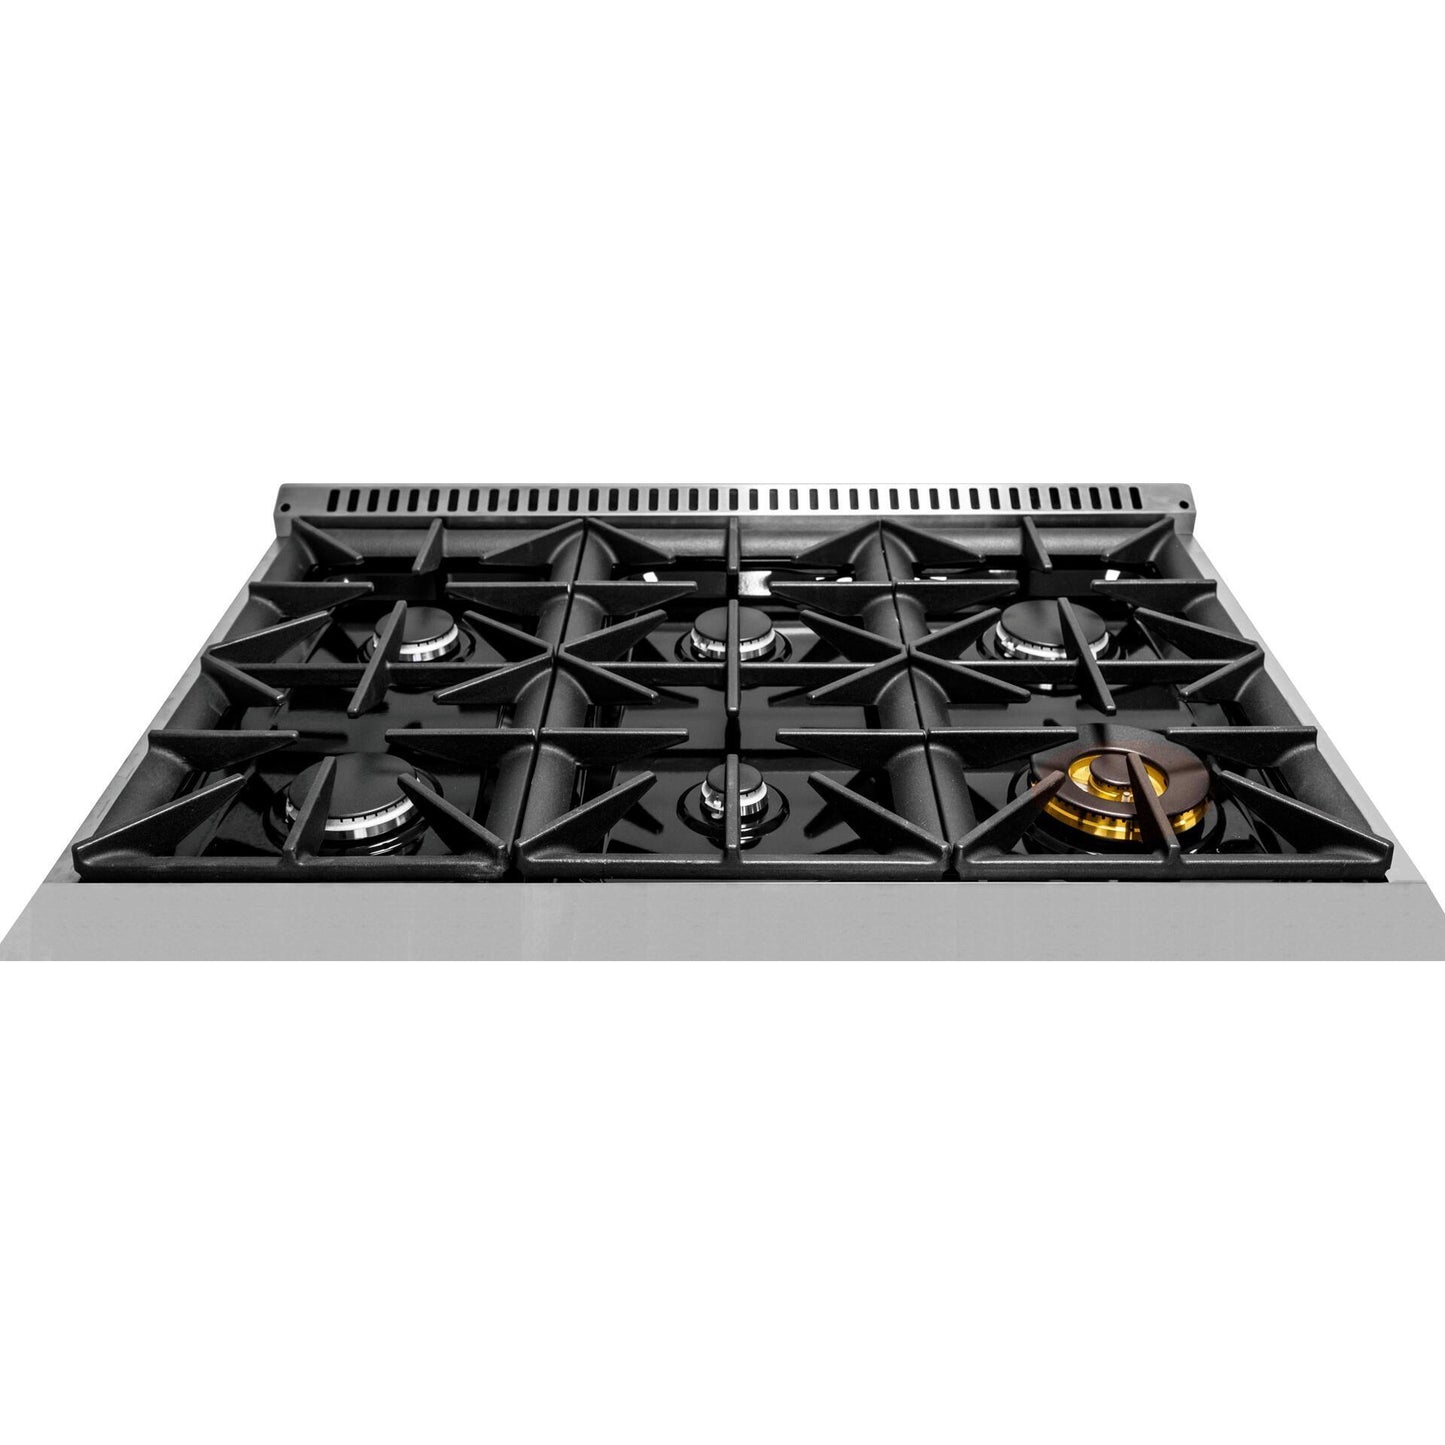 Forte FGR366BBL 36" 4.5 Cu. Ft. Single Oven Midnight Blue Freestanding Natural Gas LP Convertible Residential Gas Range With Convertion Kit, Grate, Racks, Trays, and Back Splash